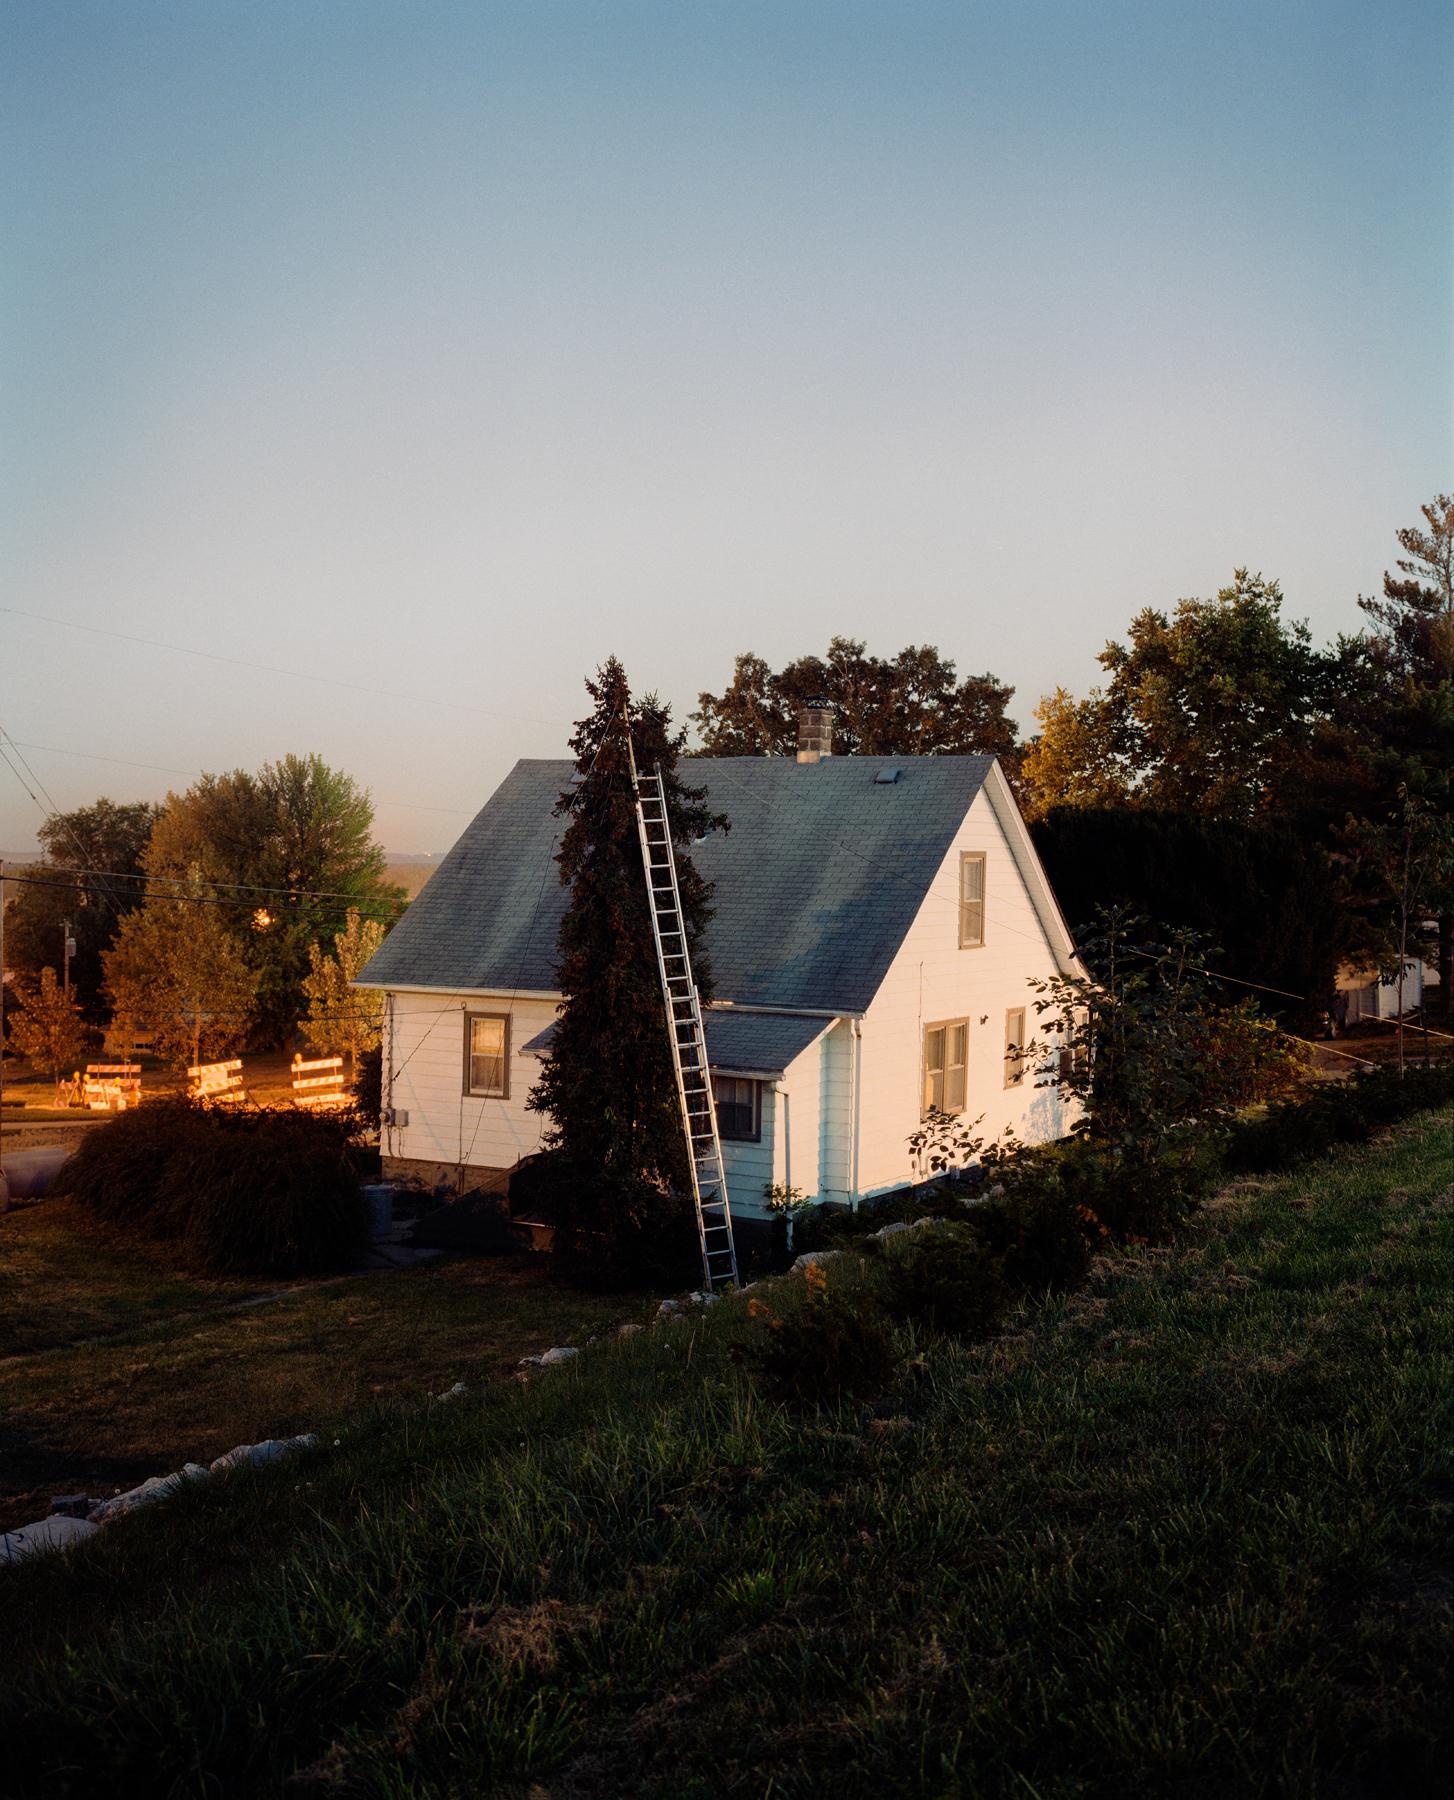 Gregory Halpern Color Photograph - Omaha Sketchbook: Ladder and House, Omaha, NE - Contemporary Photography